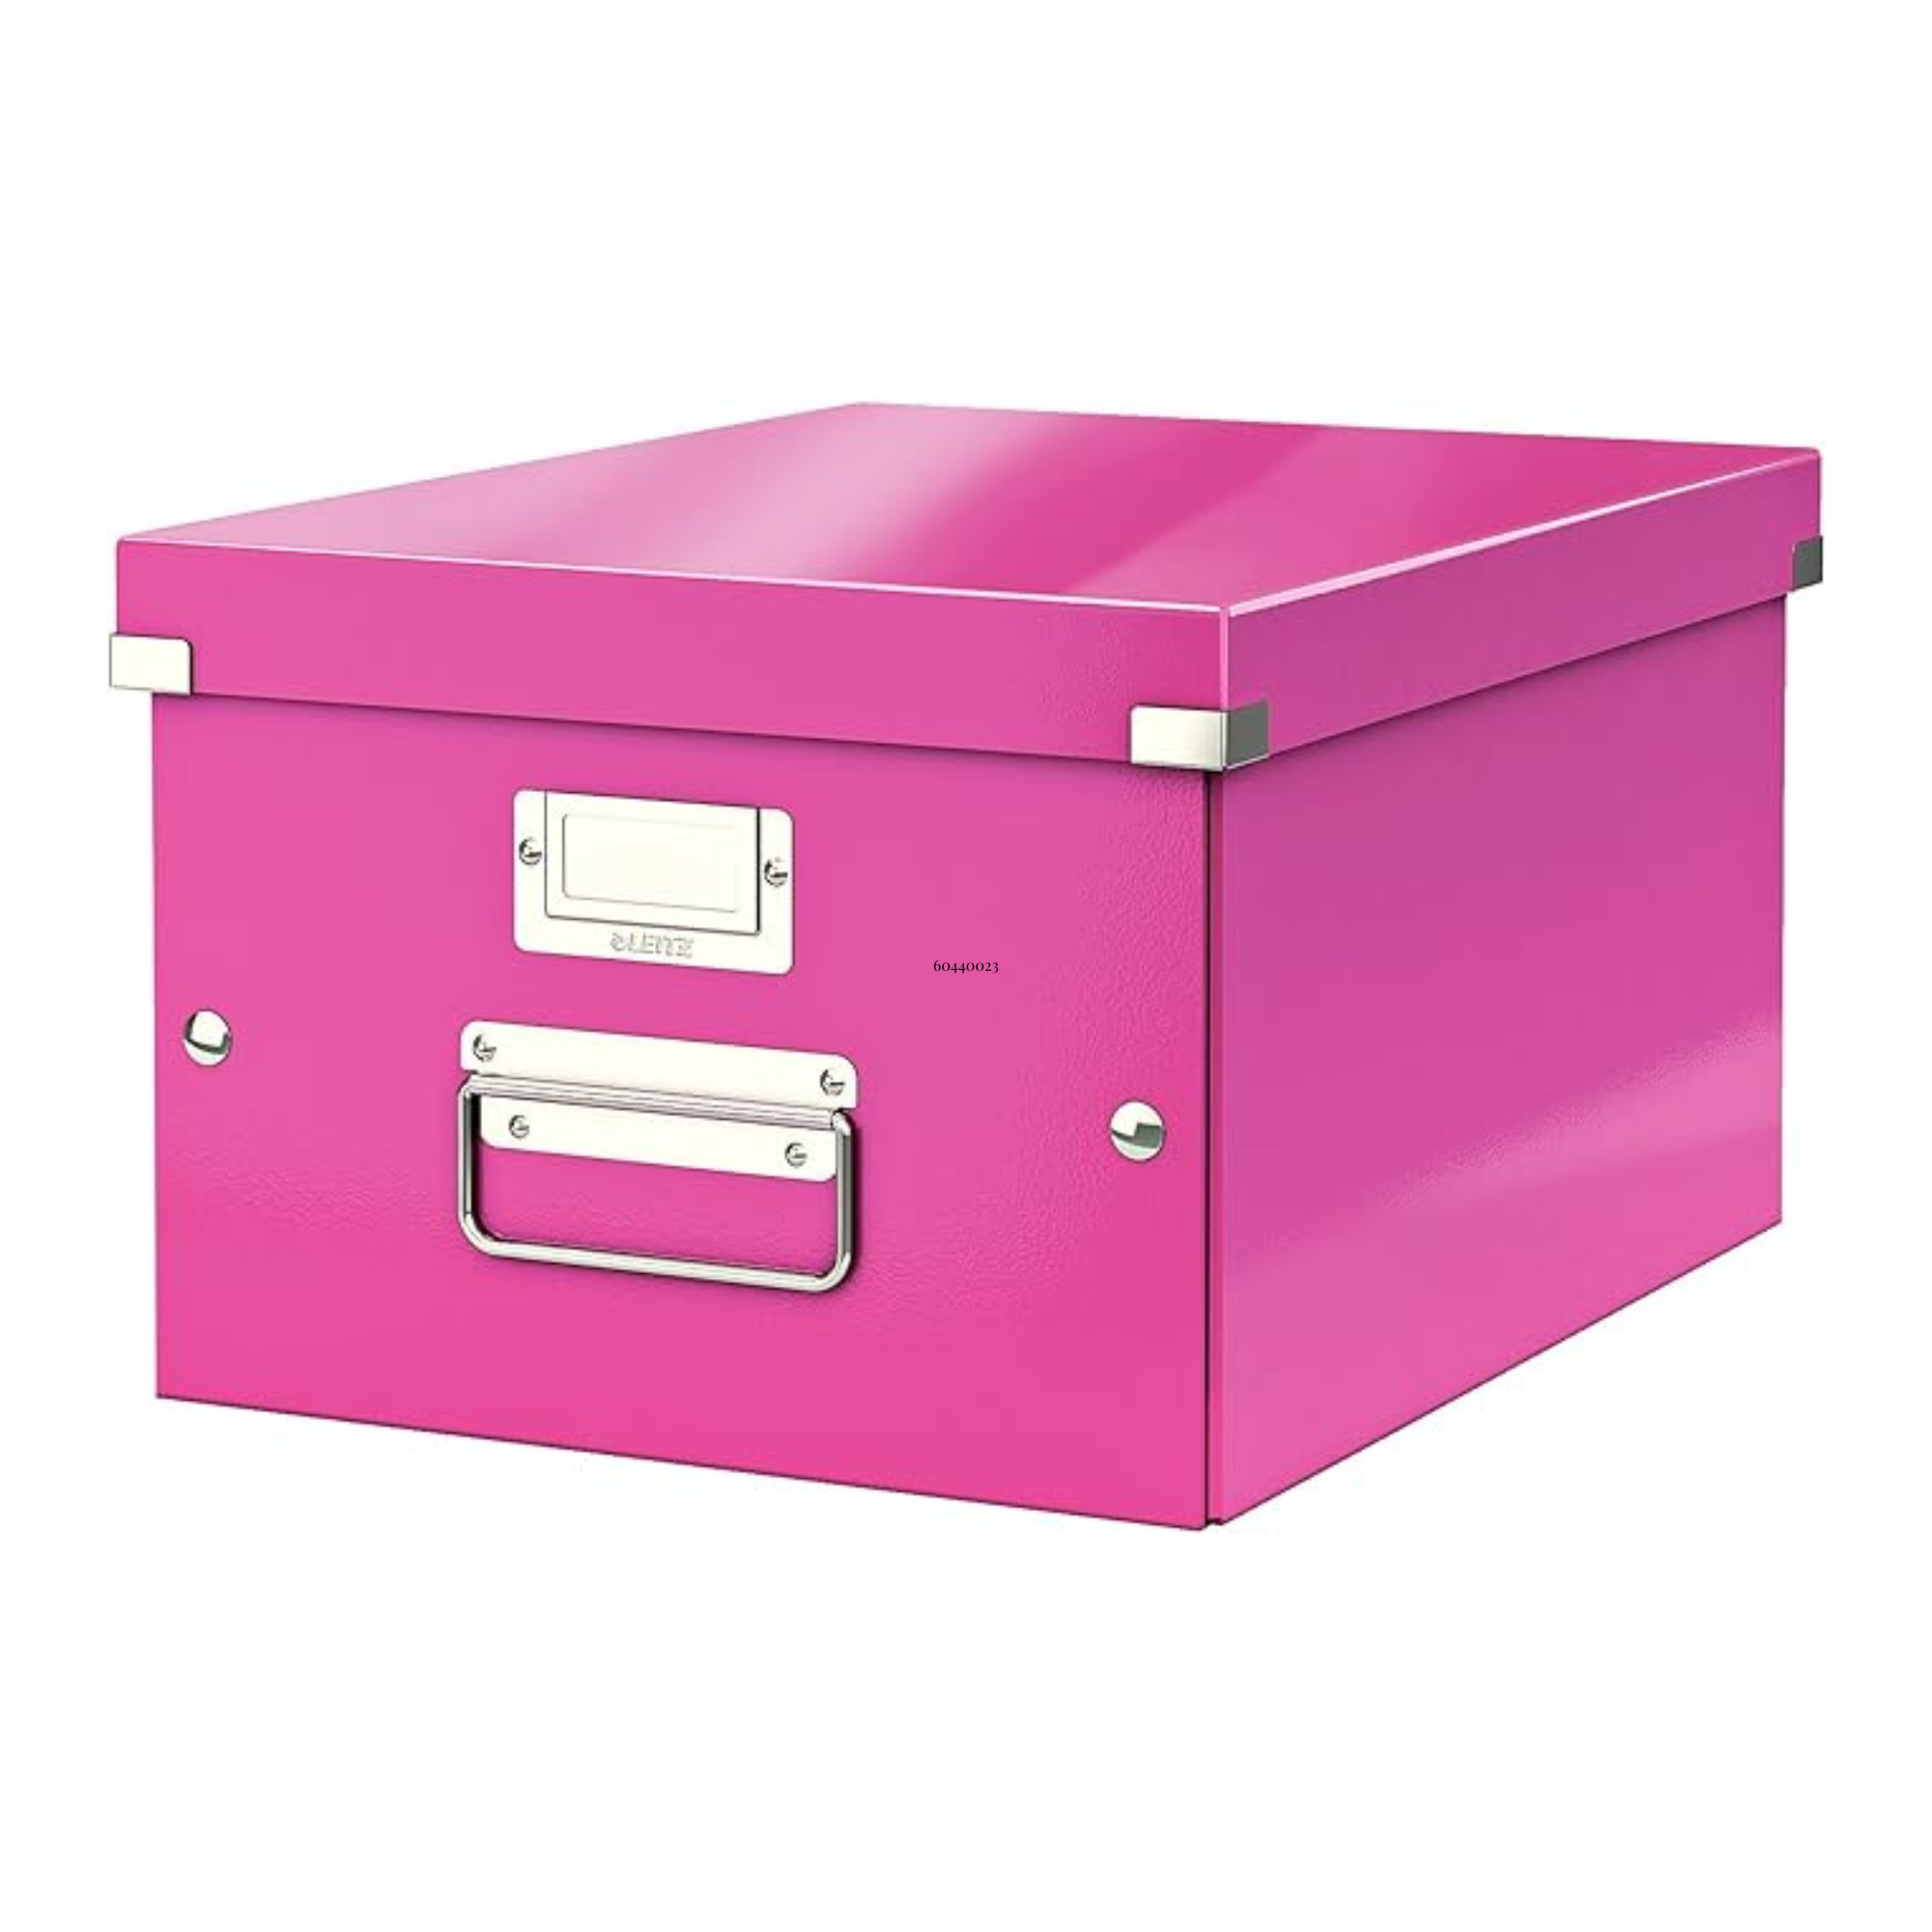 SPECIAL Leitz CLICK & STORE Box, pink